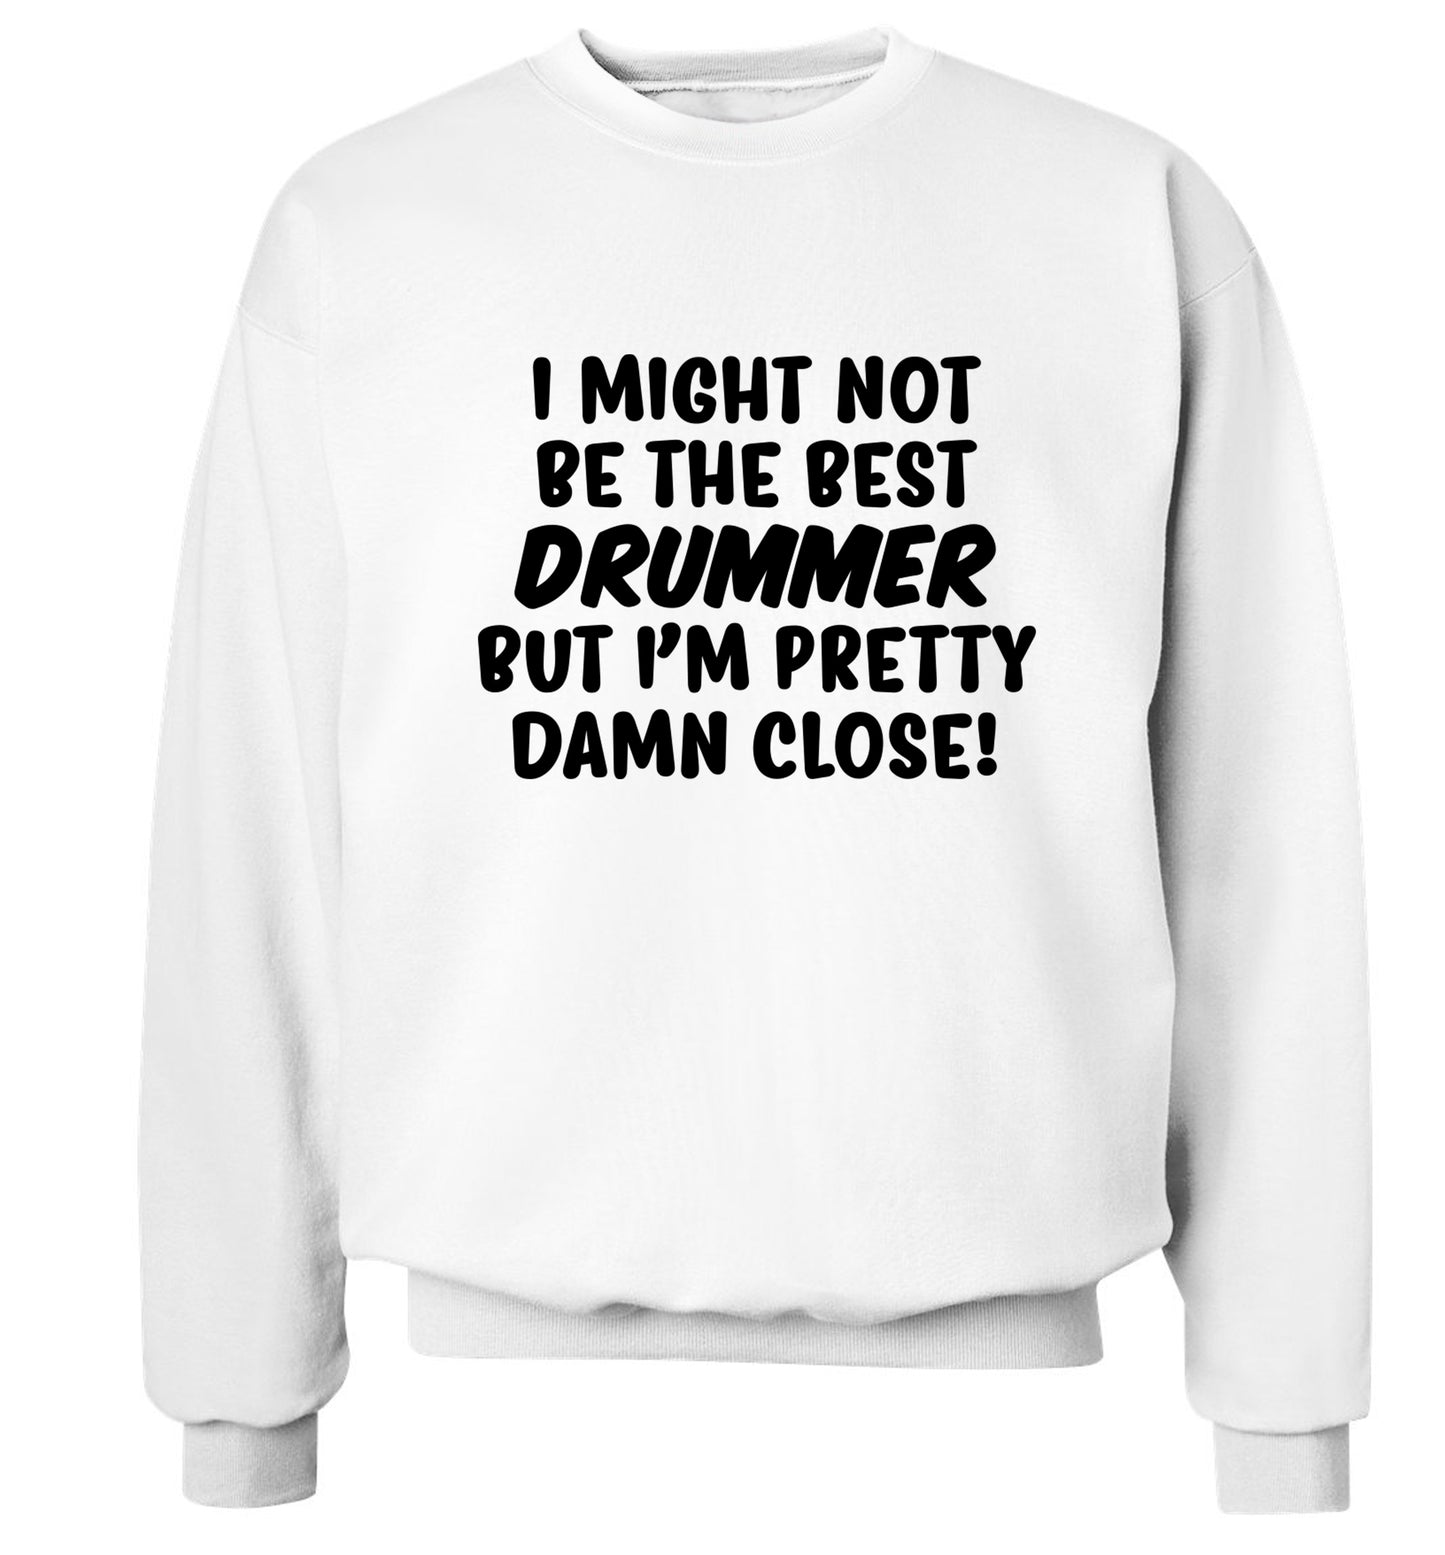 I might not be the best drummer but I'm pretty close! Adult's unisexwhite Sweater 2XL